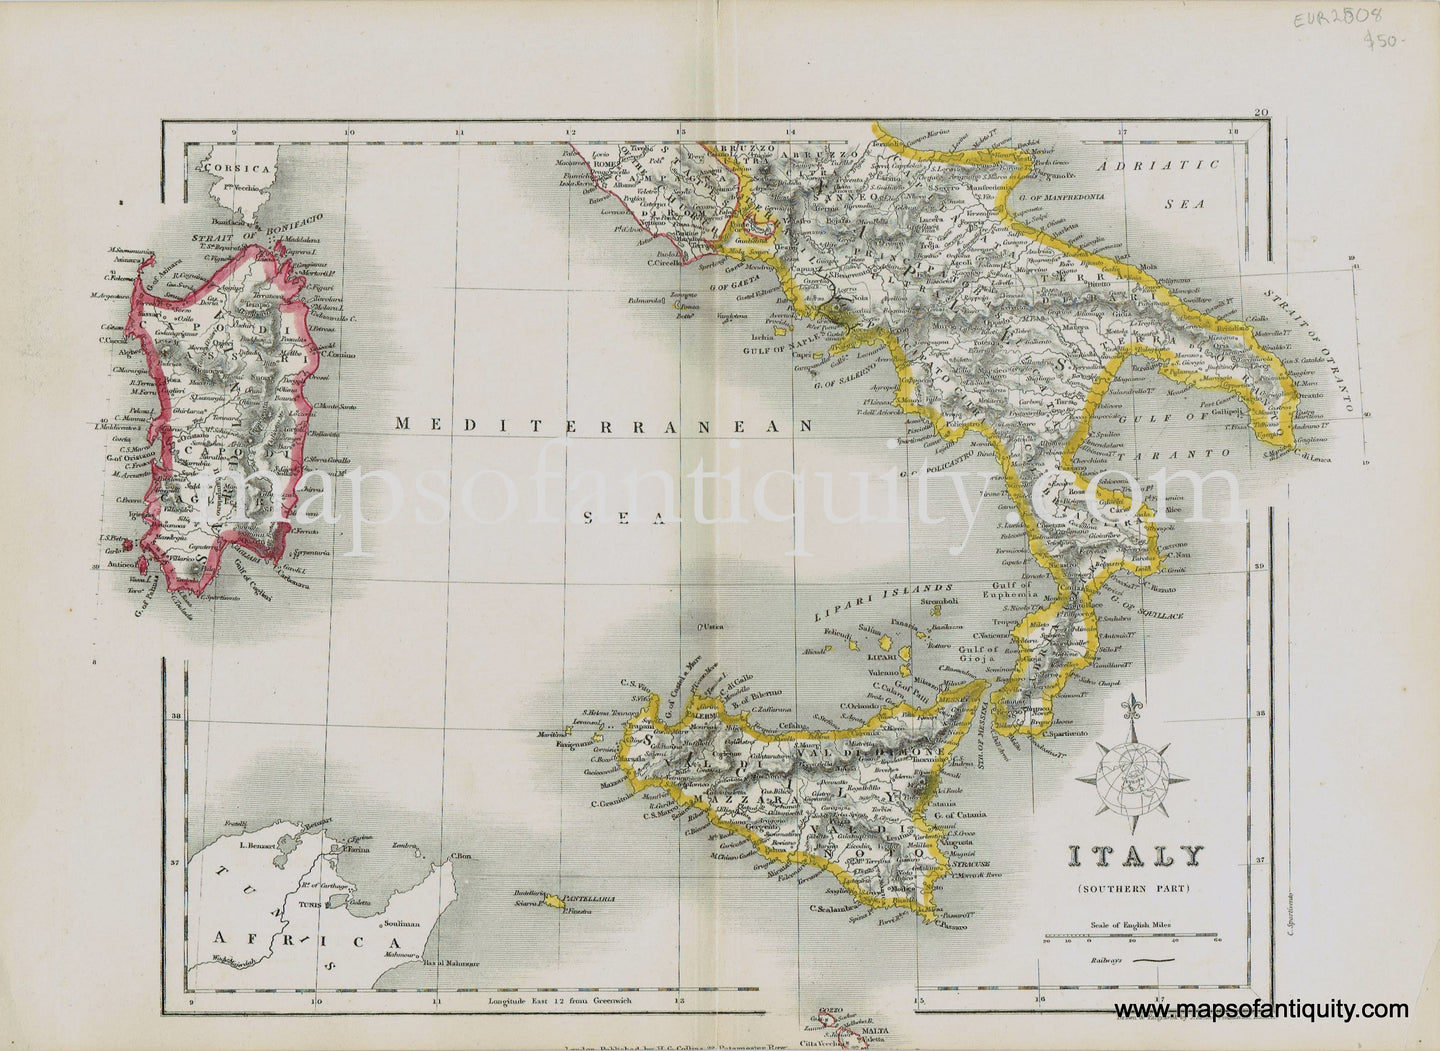 Antique-Hand-Colored-Map-Italy-(Southern-Part)-c.-1860-Archer-Collins-Italy-1800s-19th-century-Maps-of-Antiquity